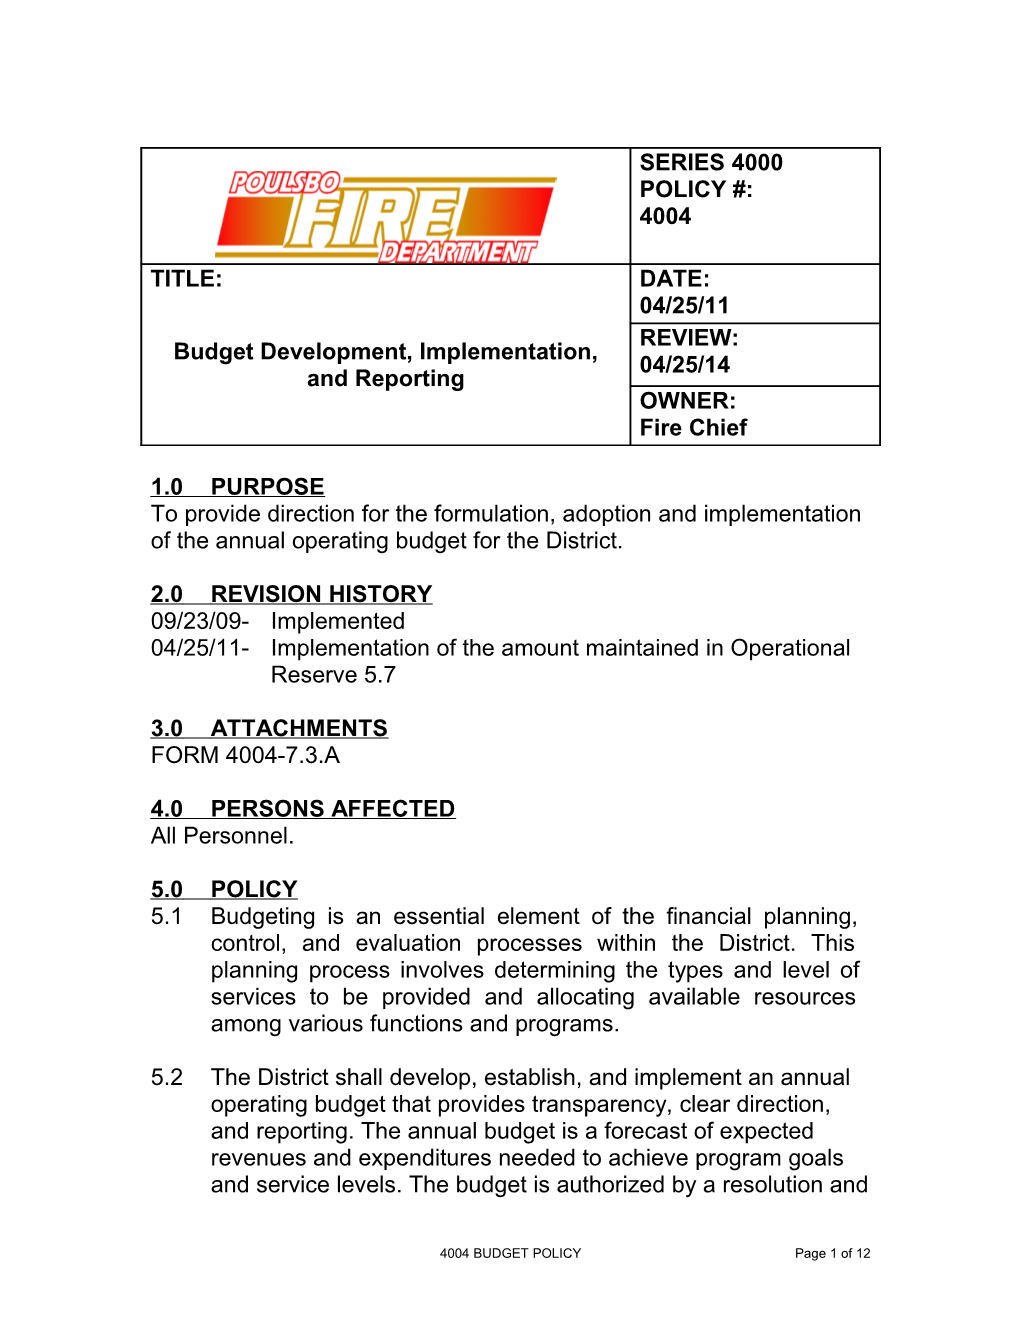 04/25/11- Implementation of the Amount Maintained in Operational